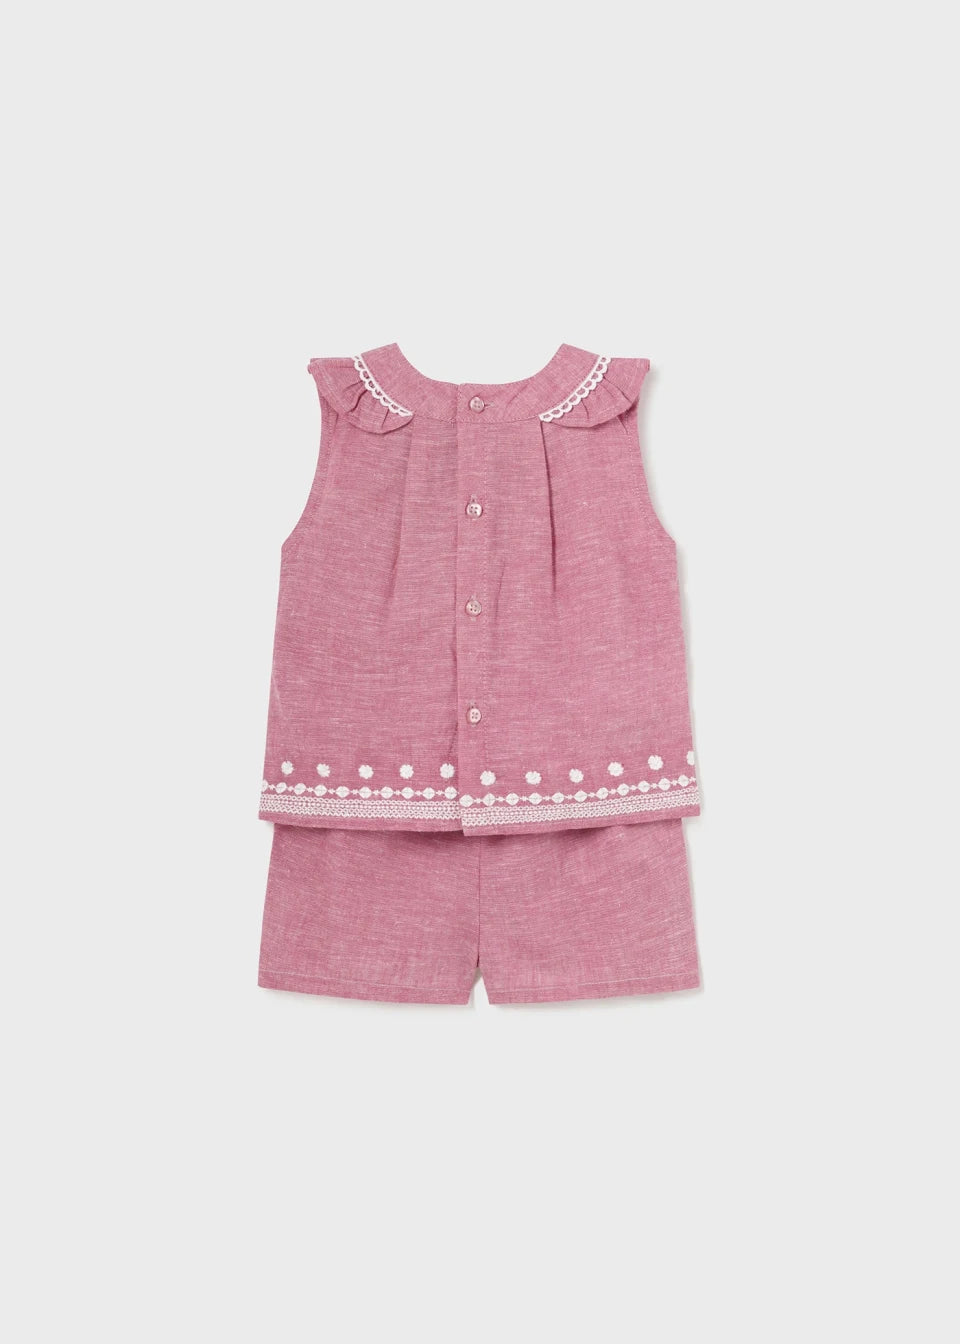 Baby embroidered pink linen top & shorts set